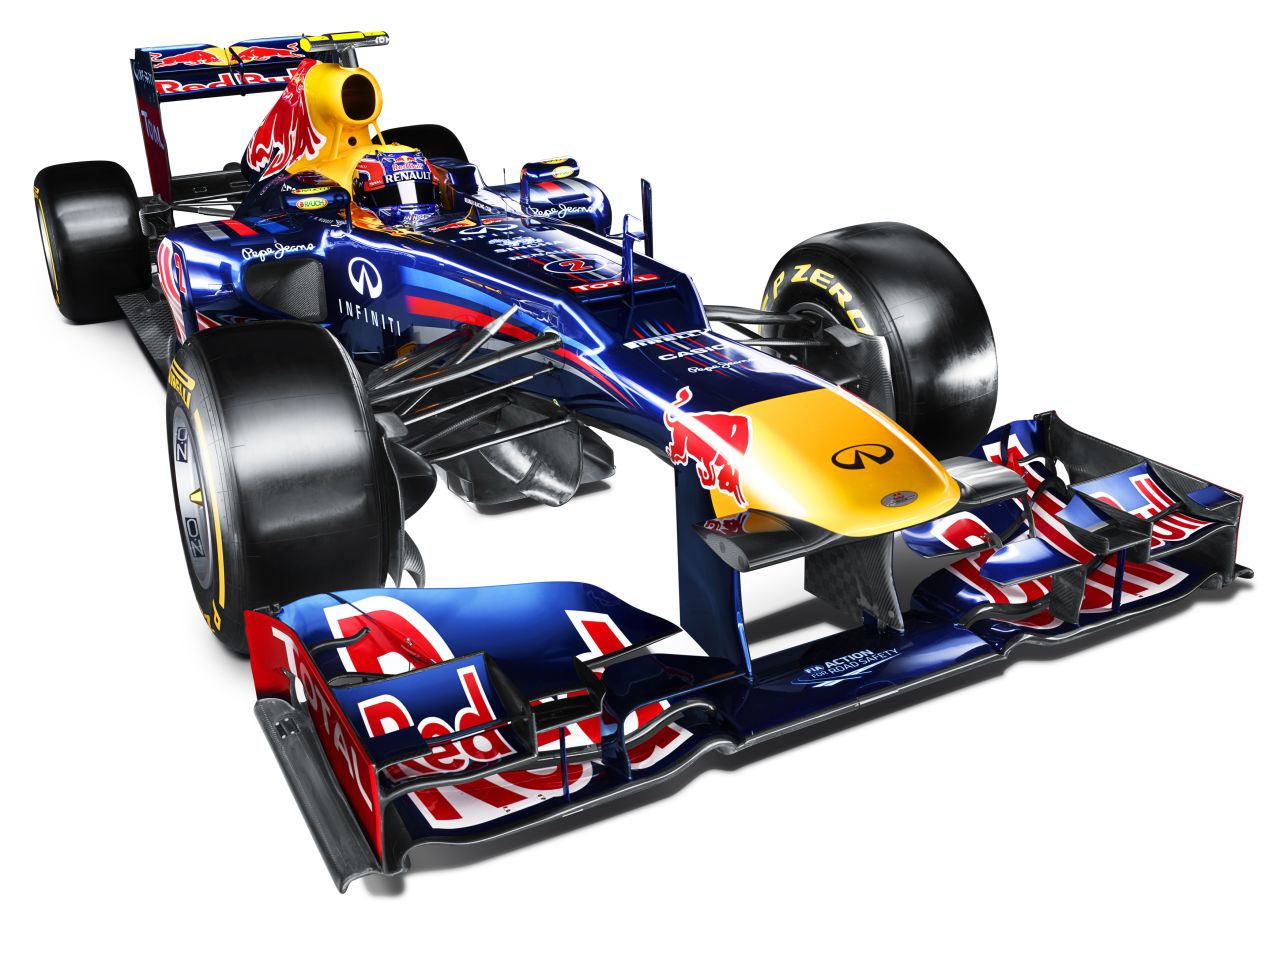 Reigning constructors' champions Red Bull have unveiled their new RB8 car for the 2012 Formula One season. The RB8 is the UK-based Austrian team's eighth F1 car.